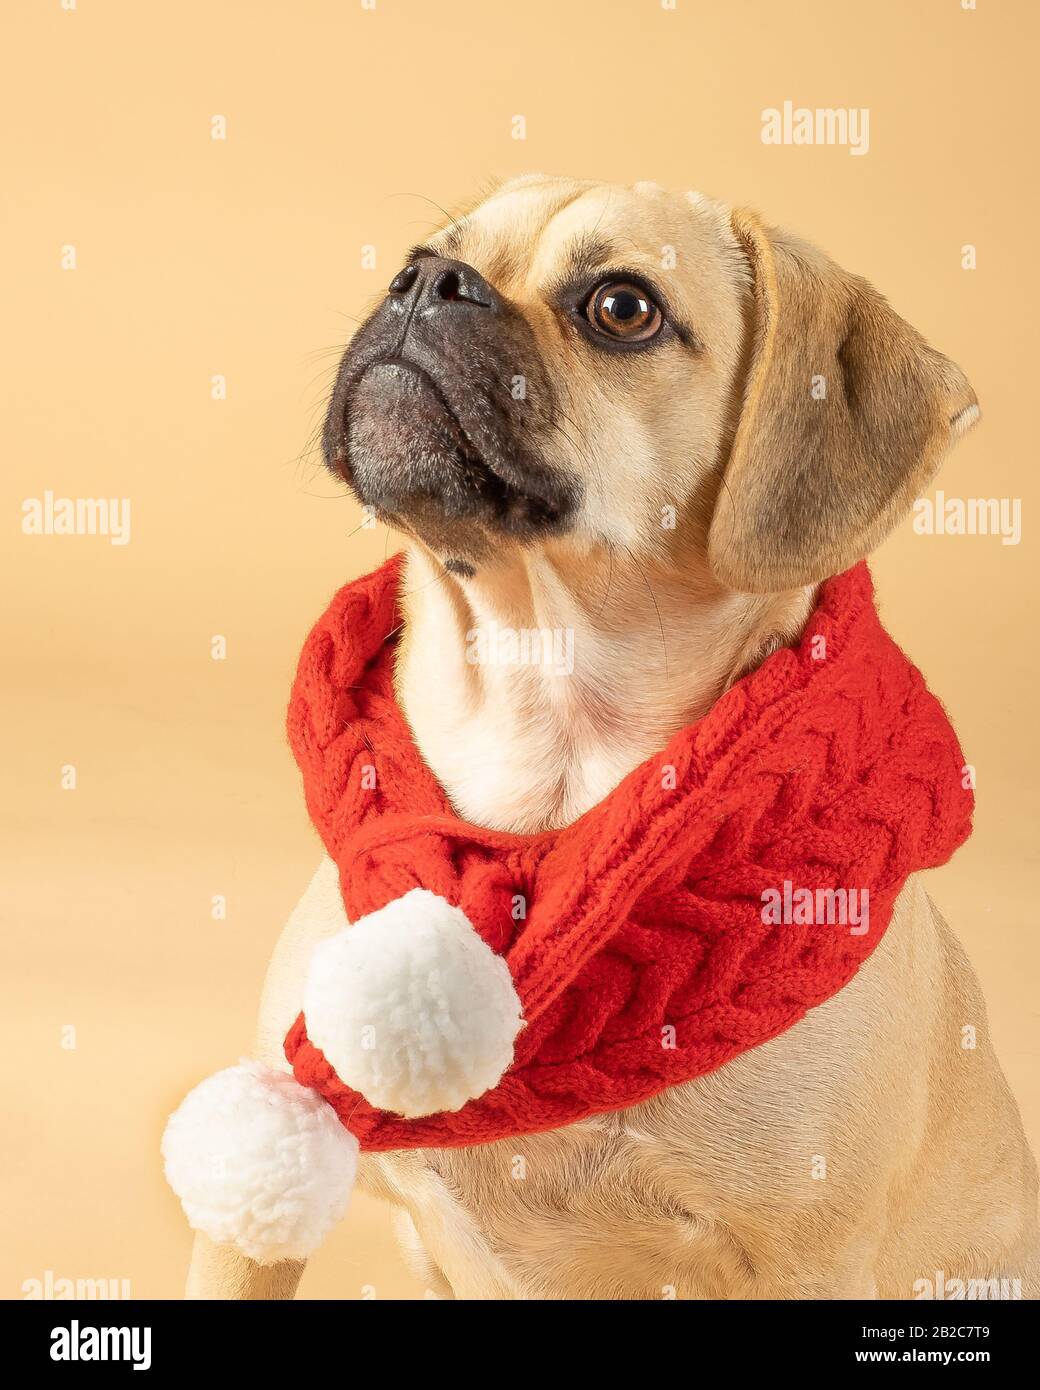 Portait of cute little puggle wearing a red fashion scarf Stock Photo